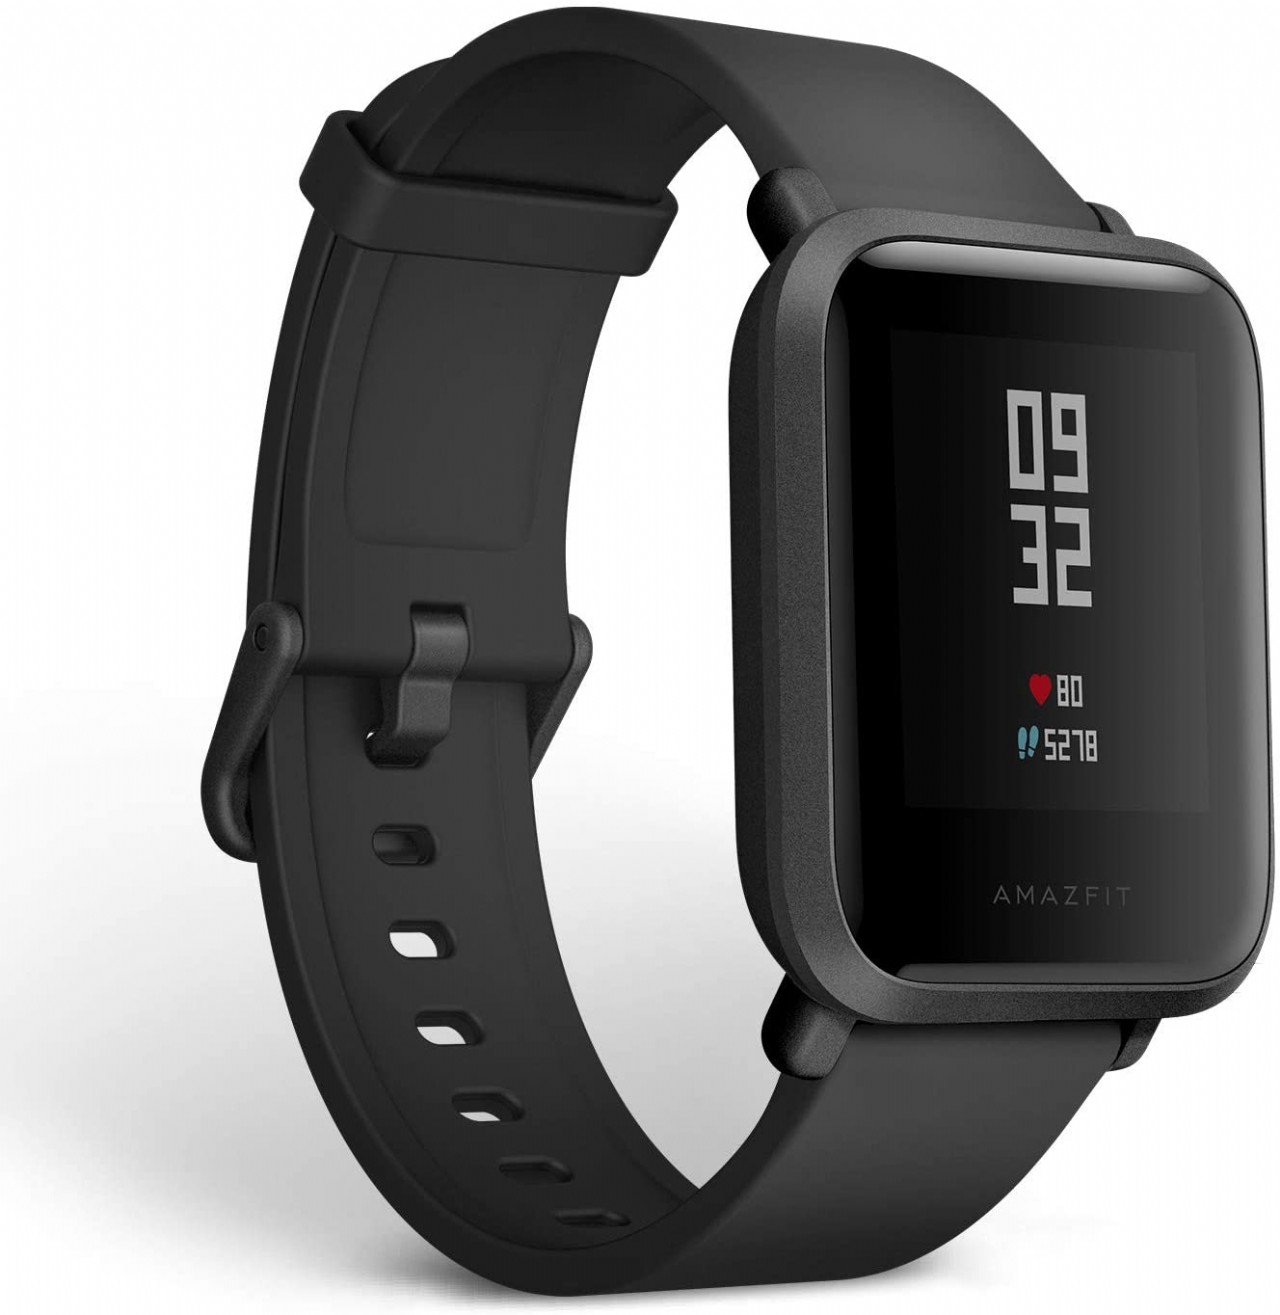 Amazfit Bip Smartwatch by Huami with All-Day Heart Rate and Activity Tracking, Sleep Monitoring, GPS